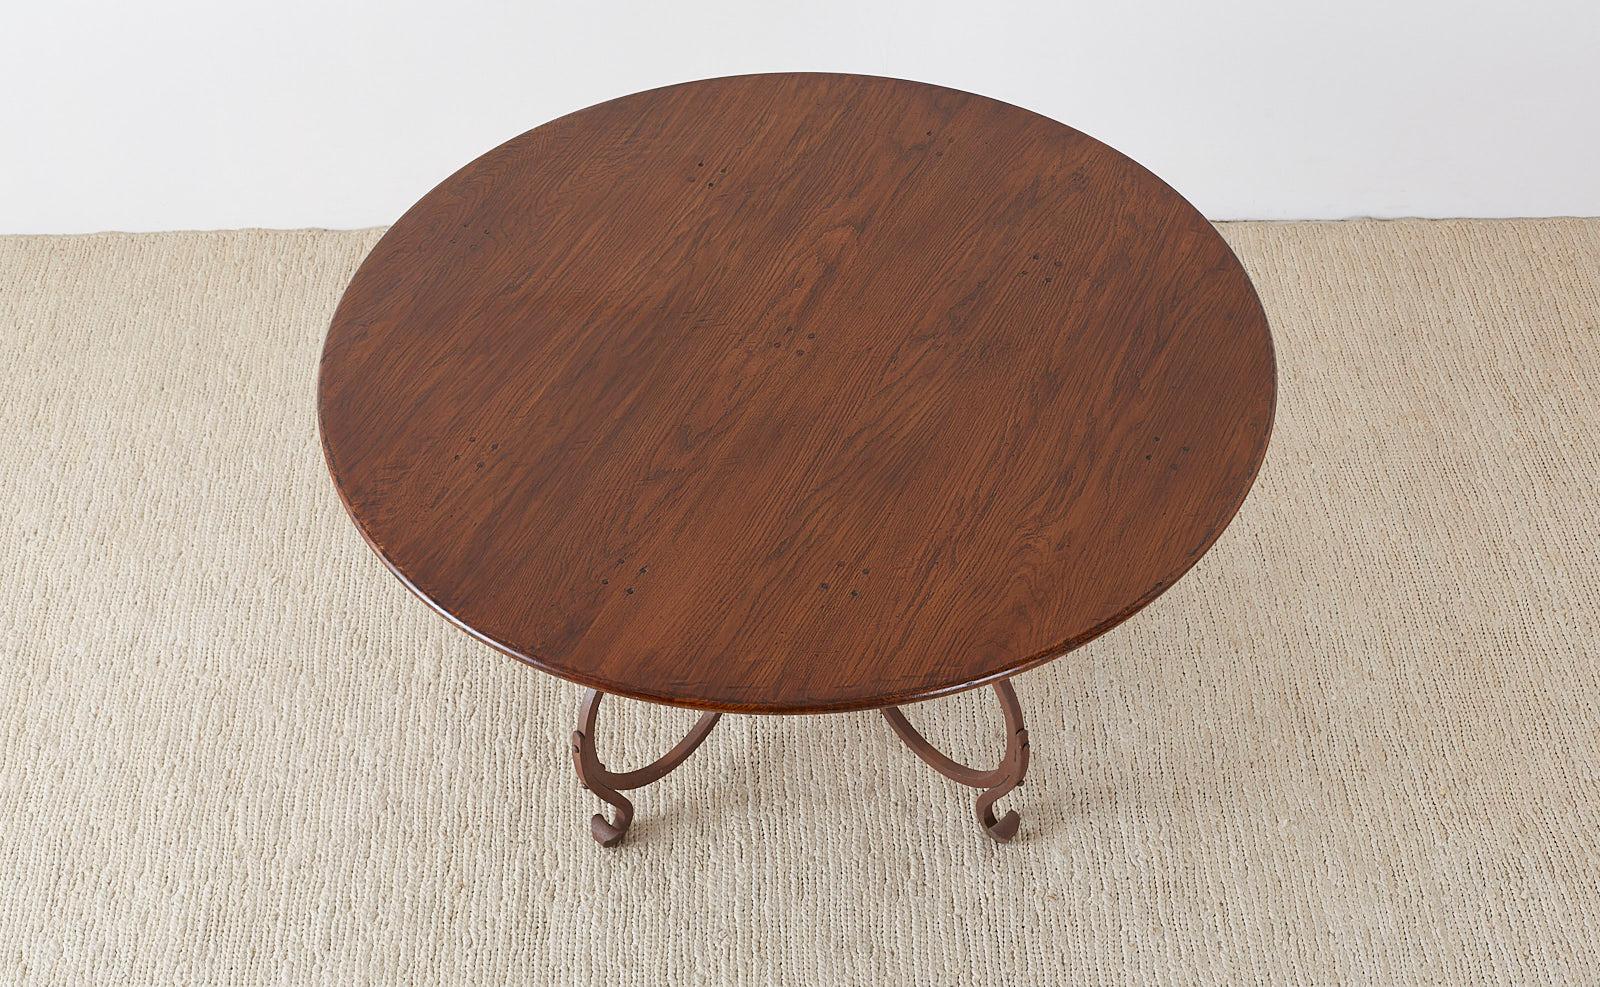 Rustic Italian Oak and Scrolled Iron Round Dining Table